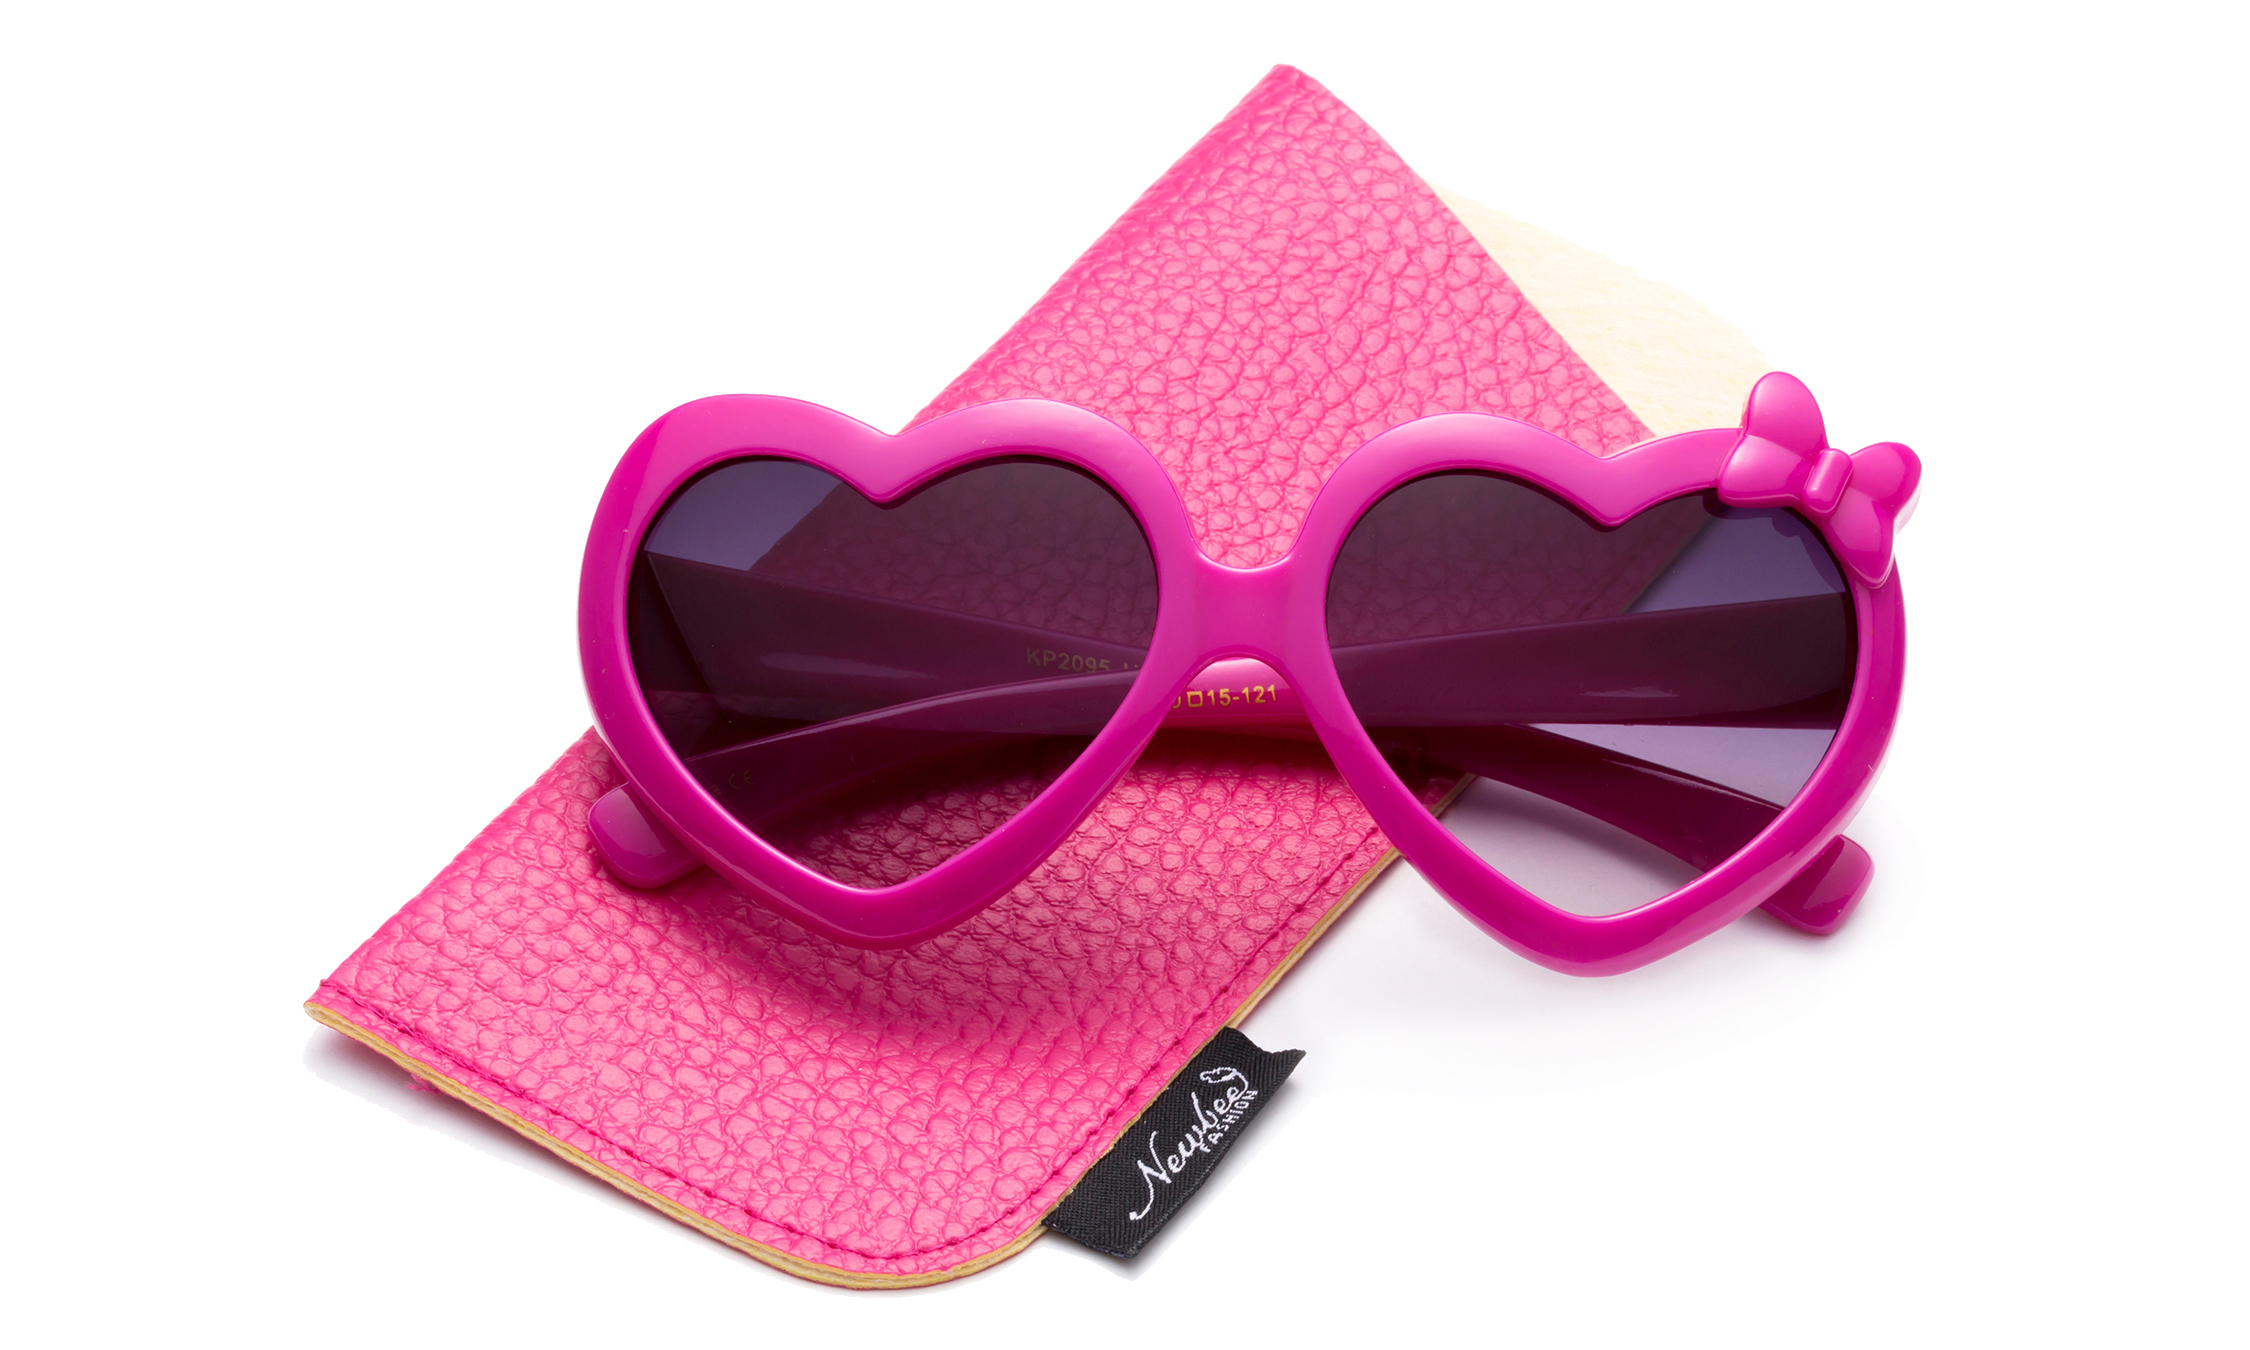 Newbee Fashion- Girls Heart Sunglasses with Bow Cute Heart Shaped Sunglasses for Girls Fashion Sunglasses UV Protection w/Carrying Pouch - image 2 of 3